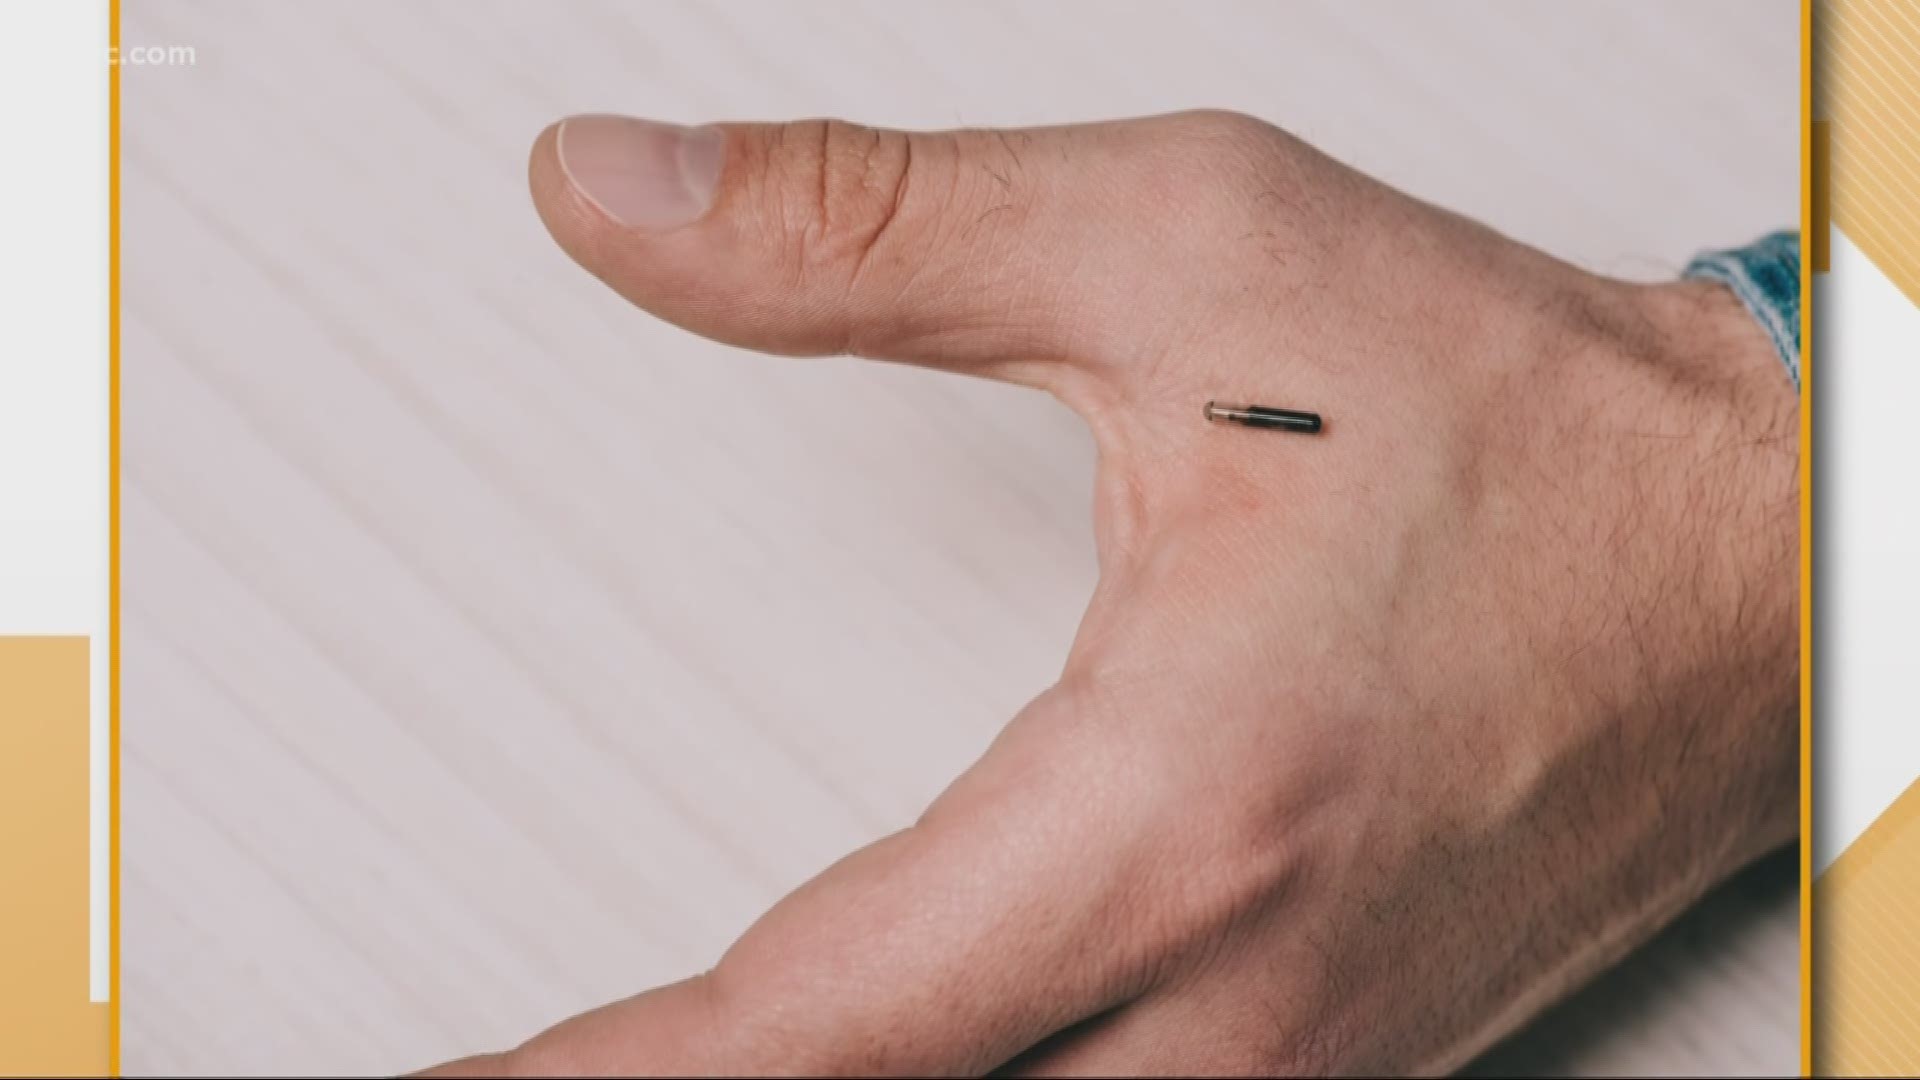 The Swedes are taking implants to a whole new level. They're getting microchips inserted under their skin so they can do everyday activities. The chips monitor their health and allow them to purchase items in stores.